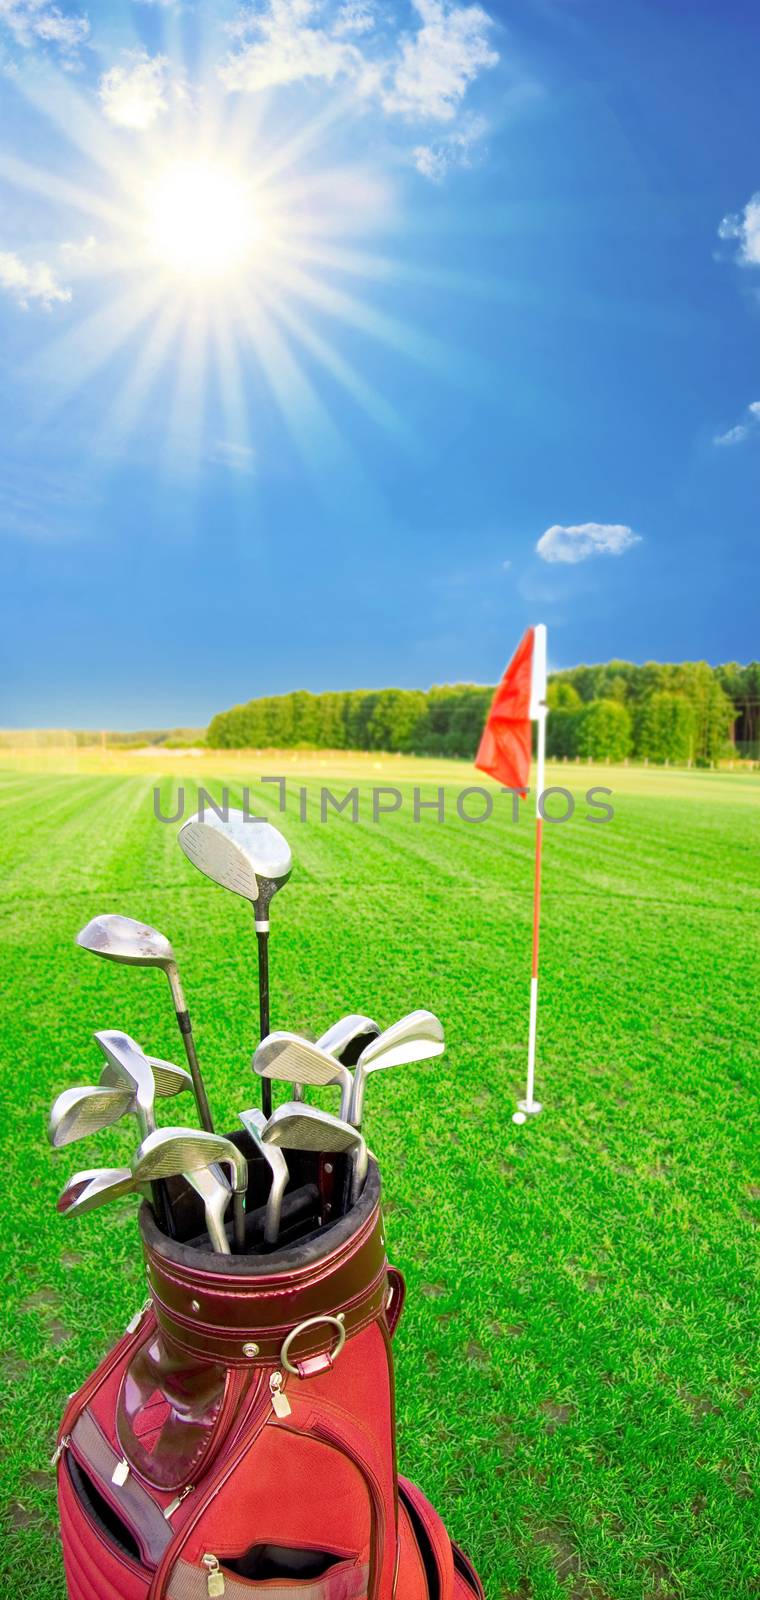 Golf game. Golf clubs in bag against the golf course with bright sun.